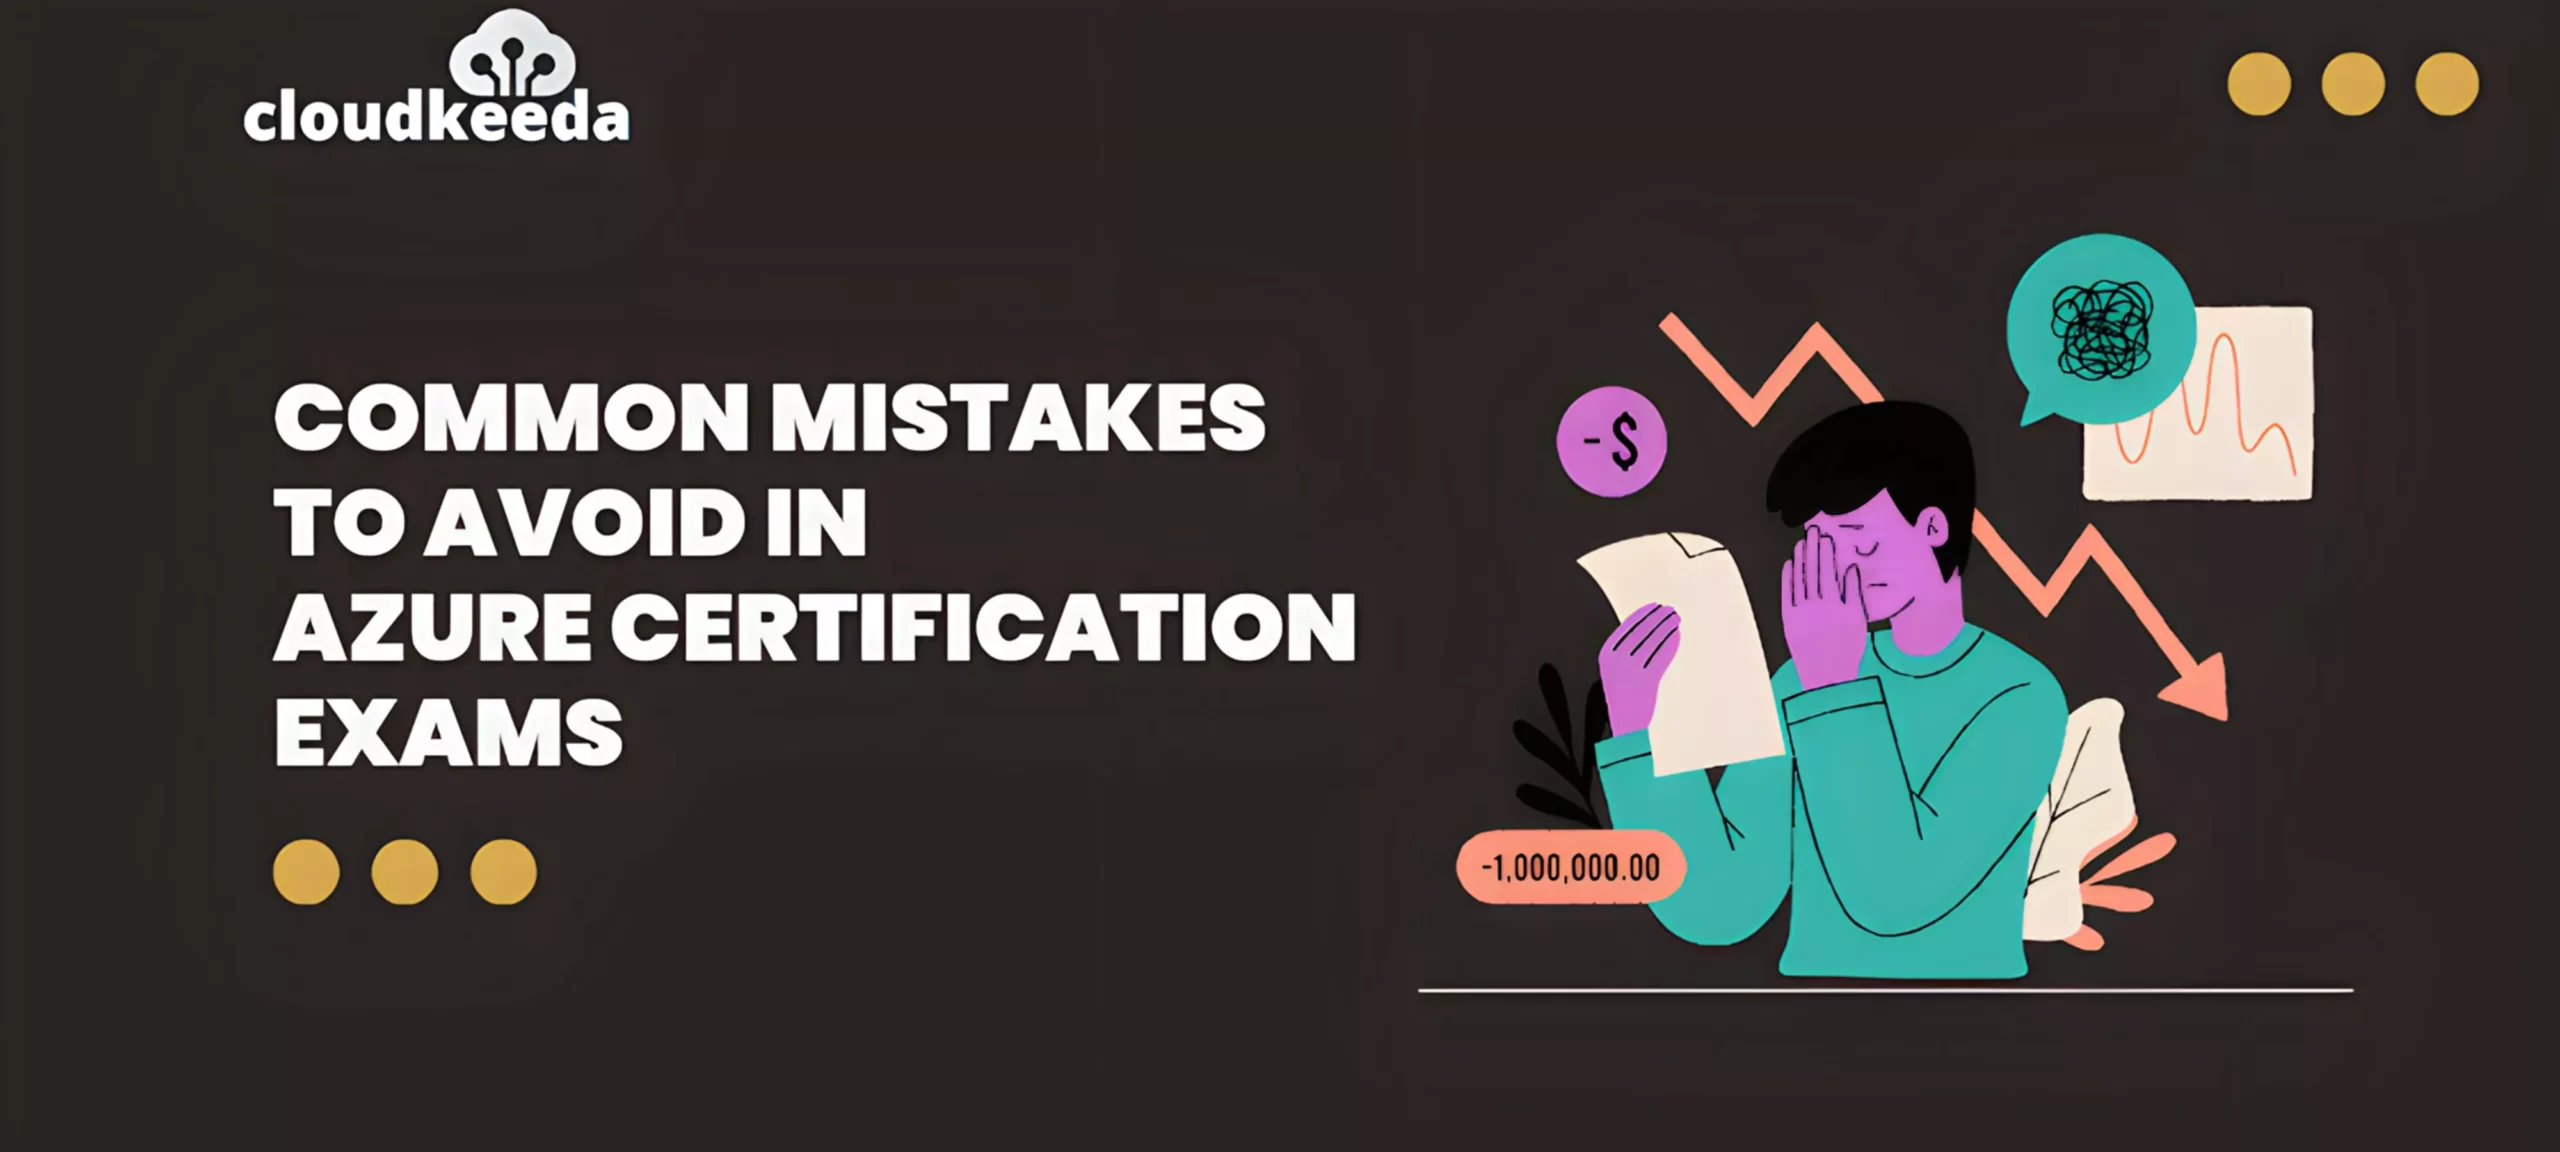 Common Mistakes to Avoid in Azure Certification Exams